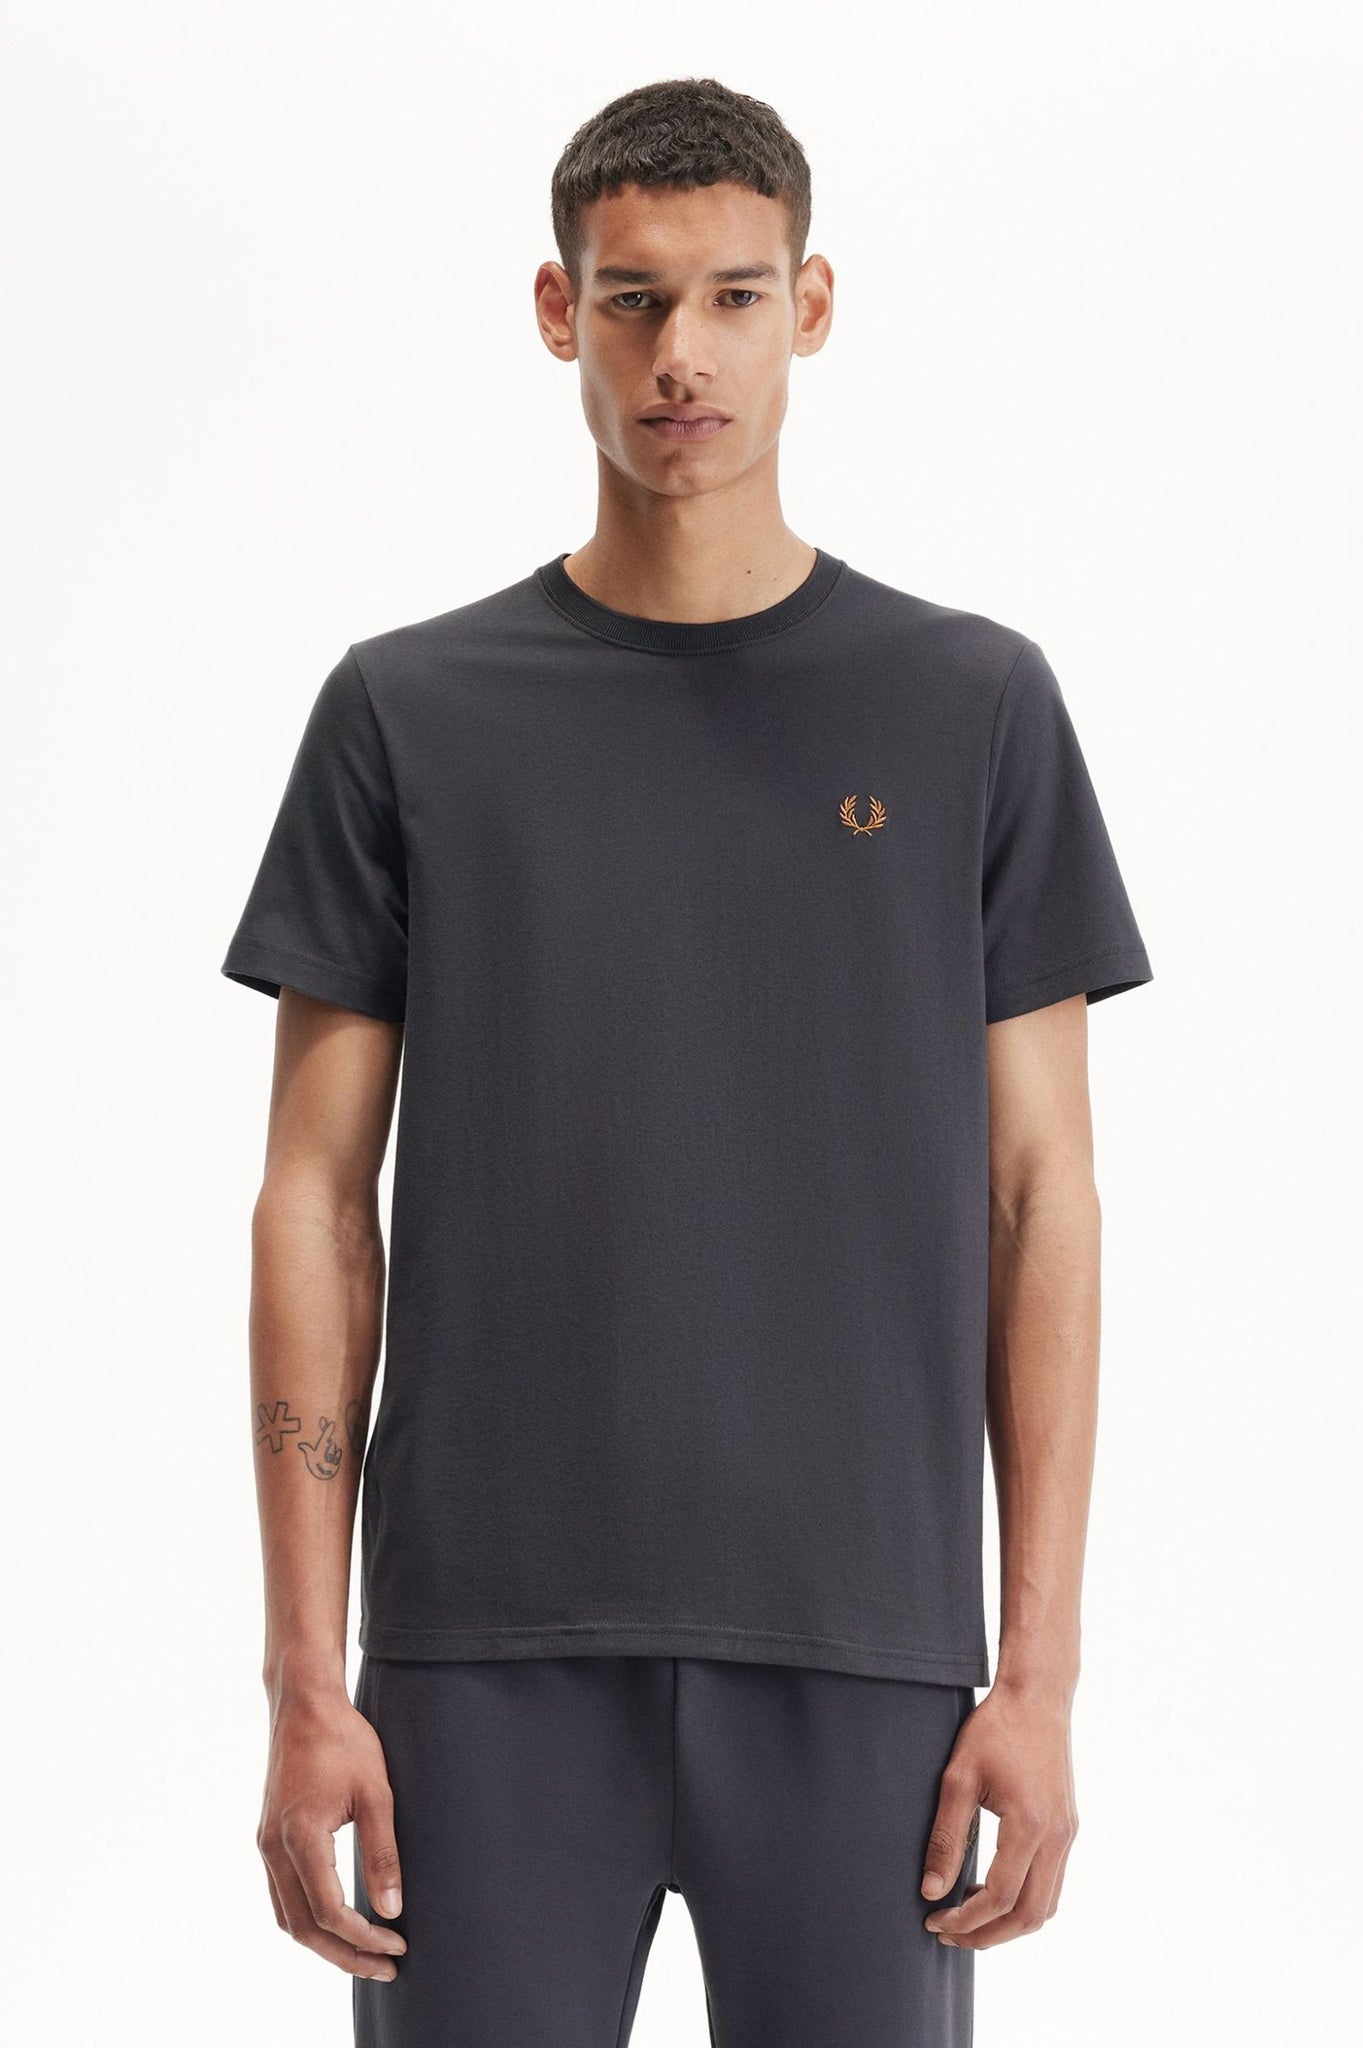 Camiseta Fred Perry M1600 Gris Ancla Caramelo Oscuro